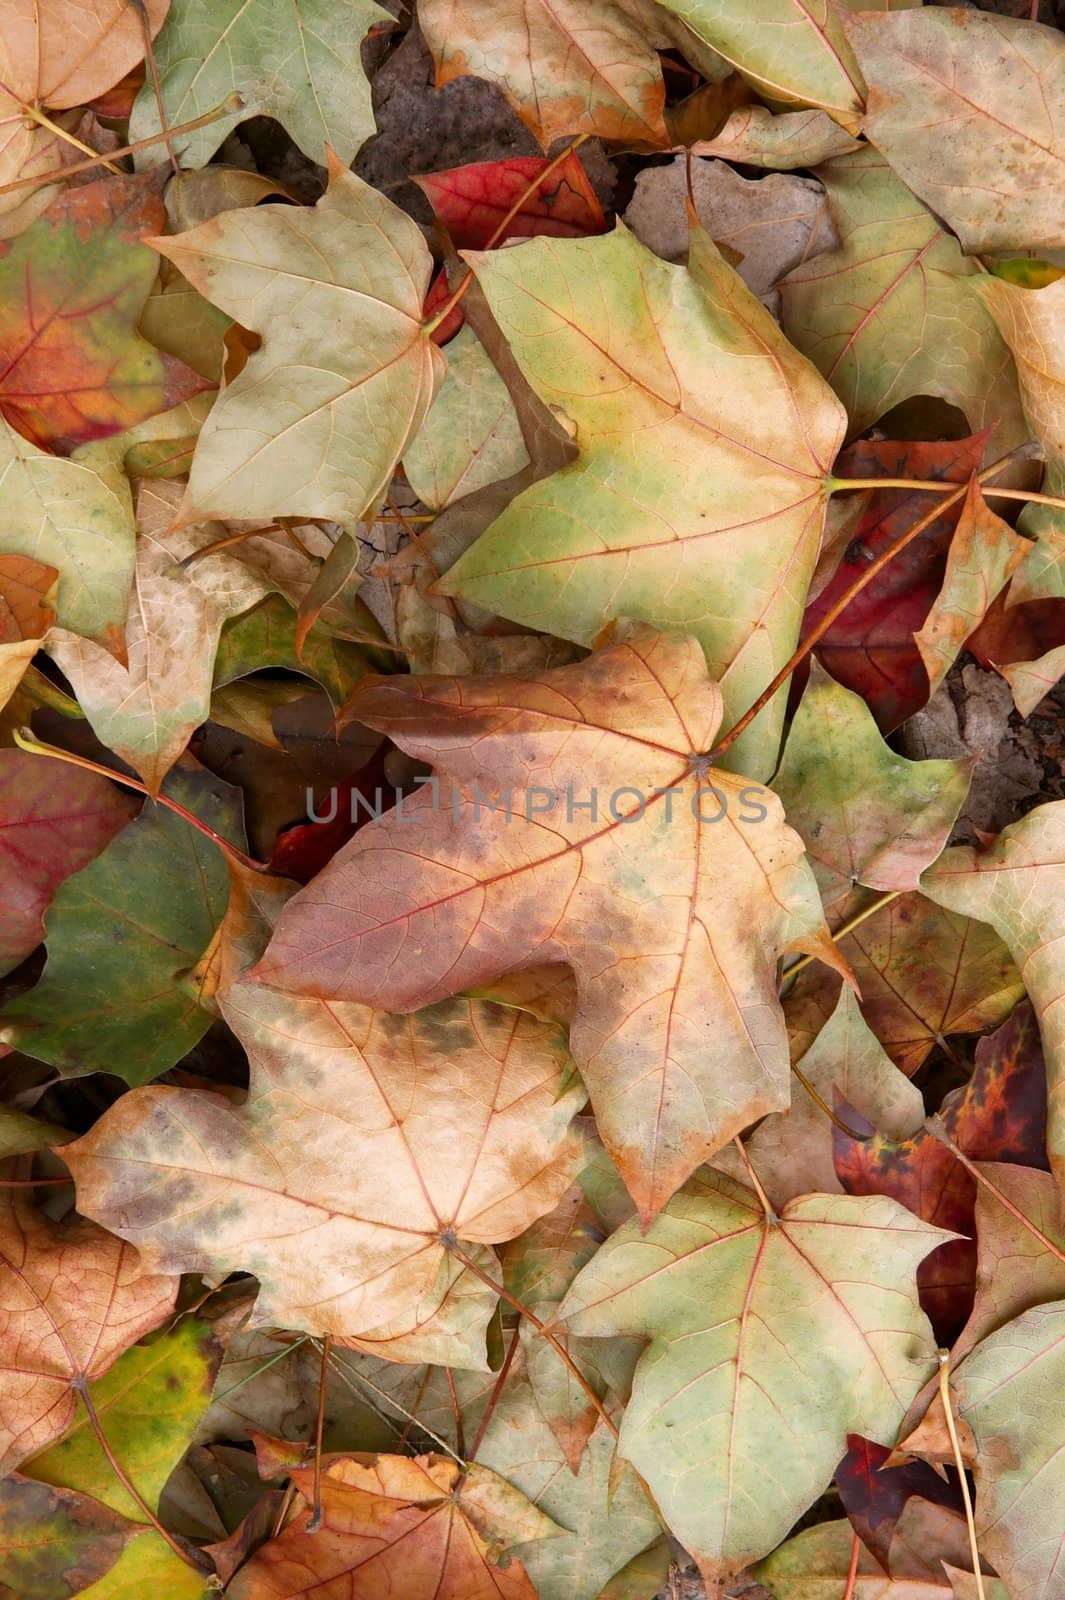 Pile of colorful fallen leaves on the ground